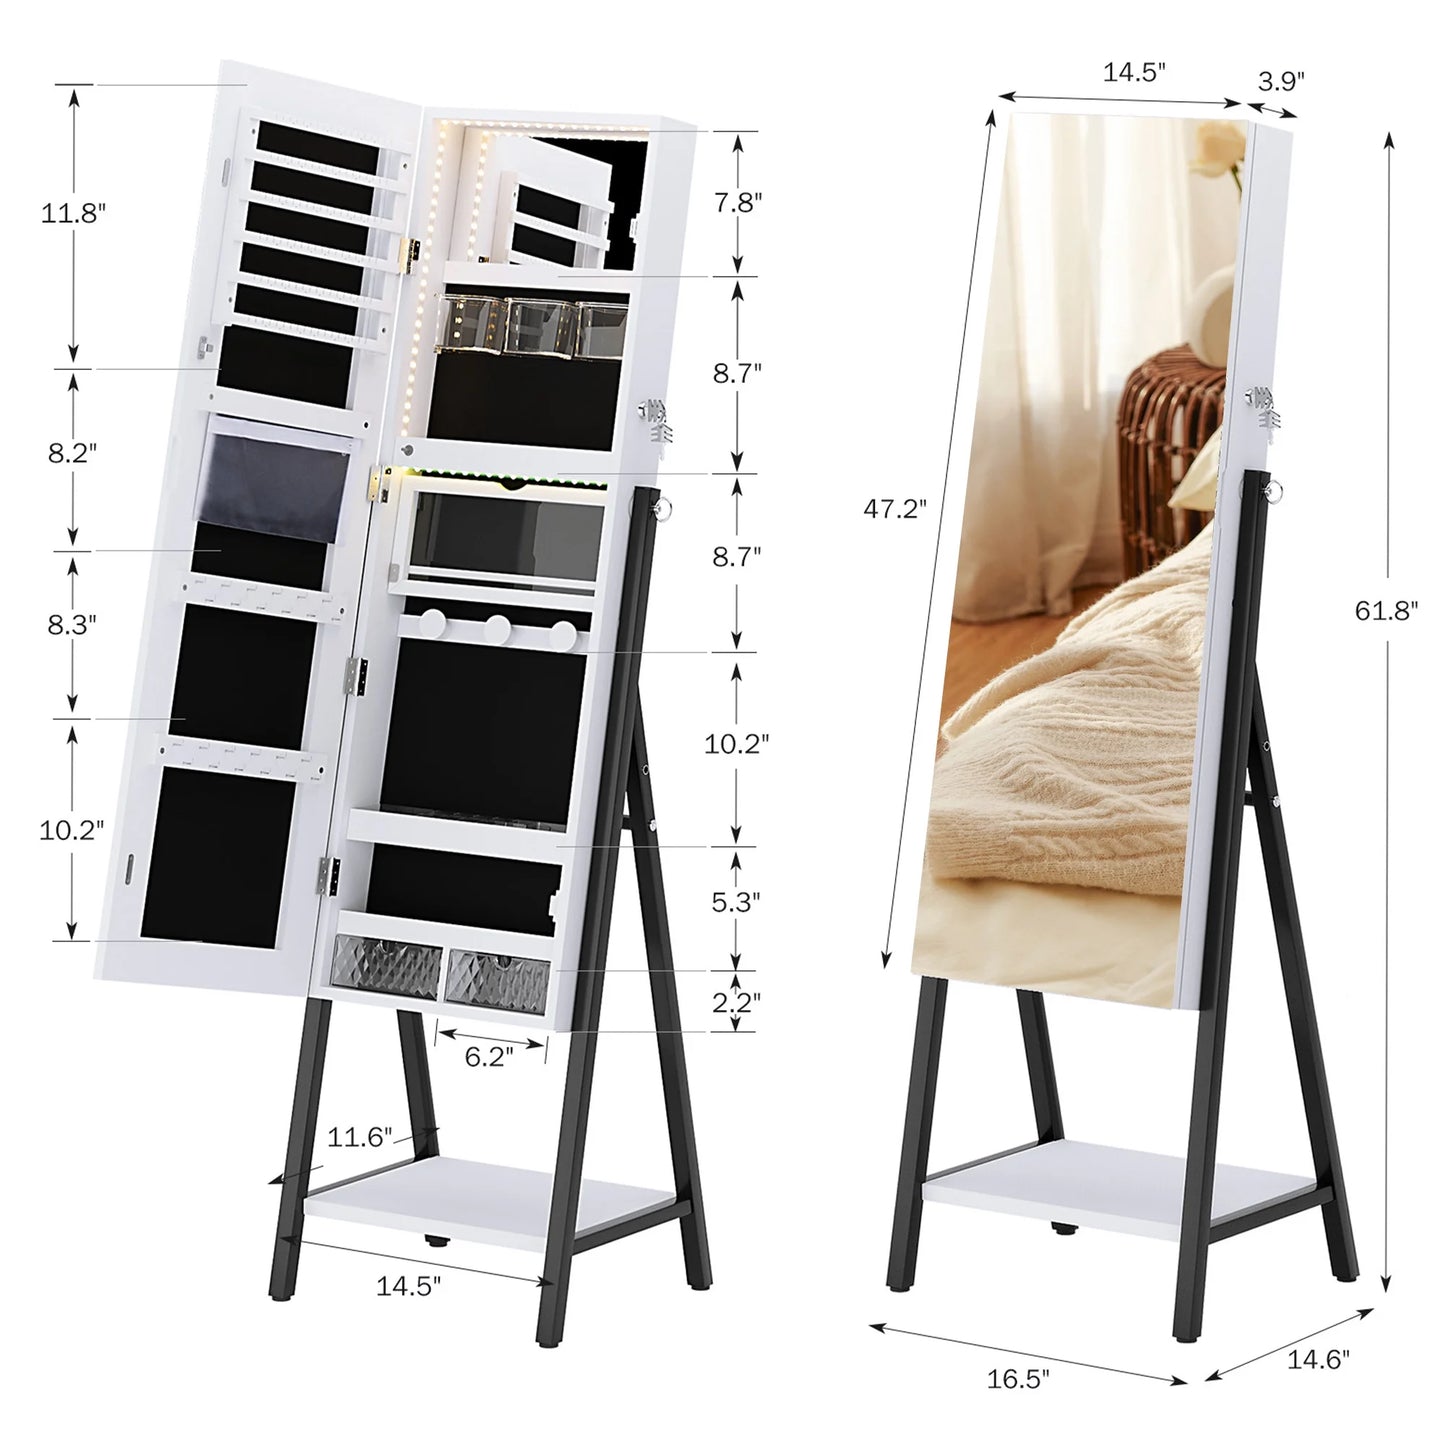 Full Mirror with Stand, Cheval Mirror Cabinet, Full Length Dressing Floor Mirror with LED Light Belt, White